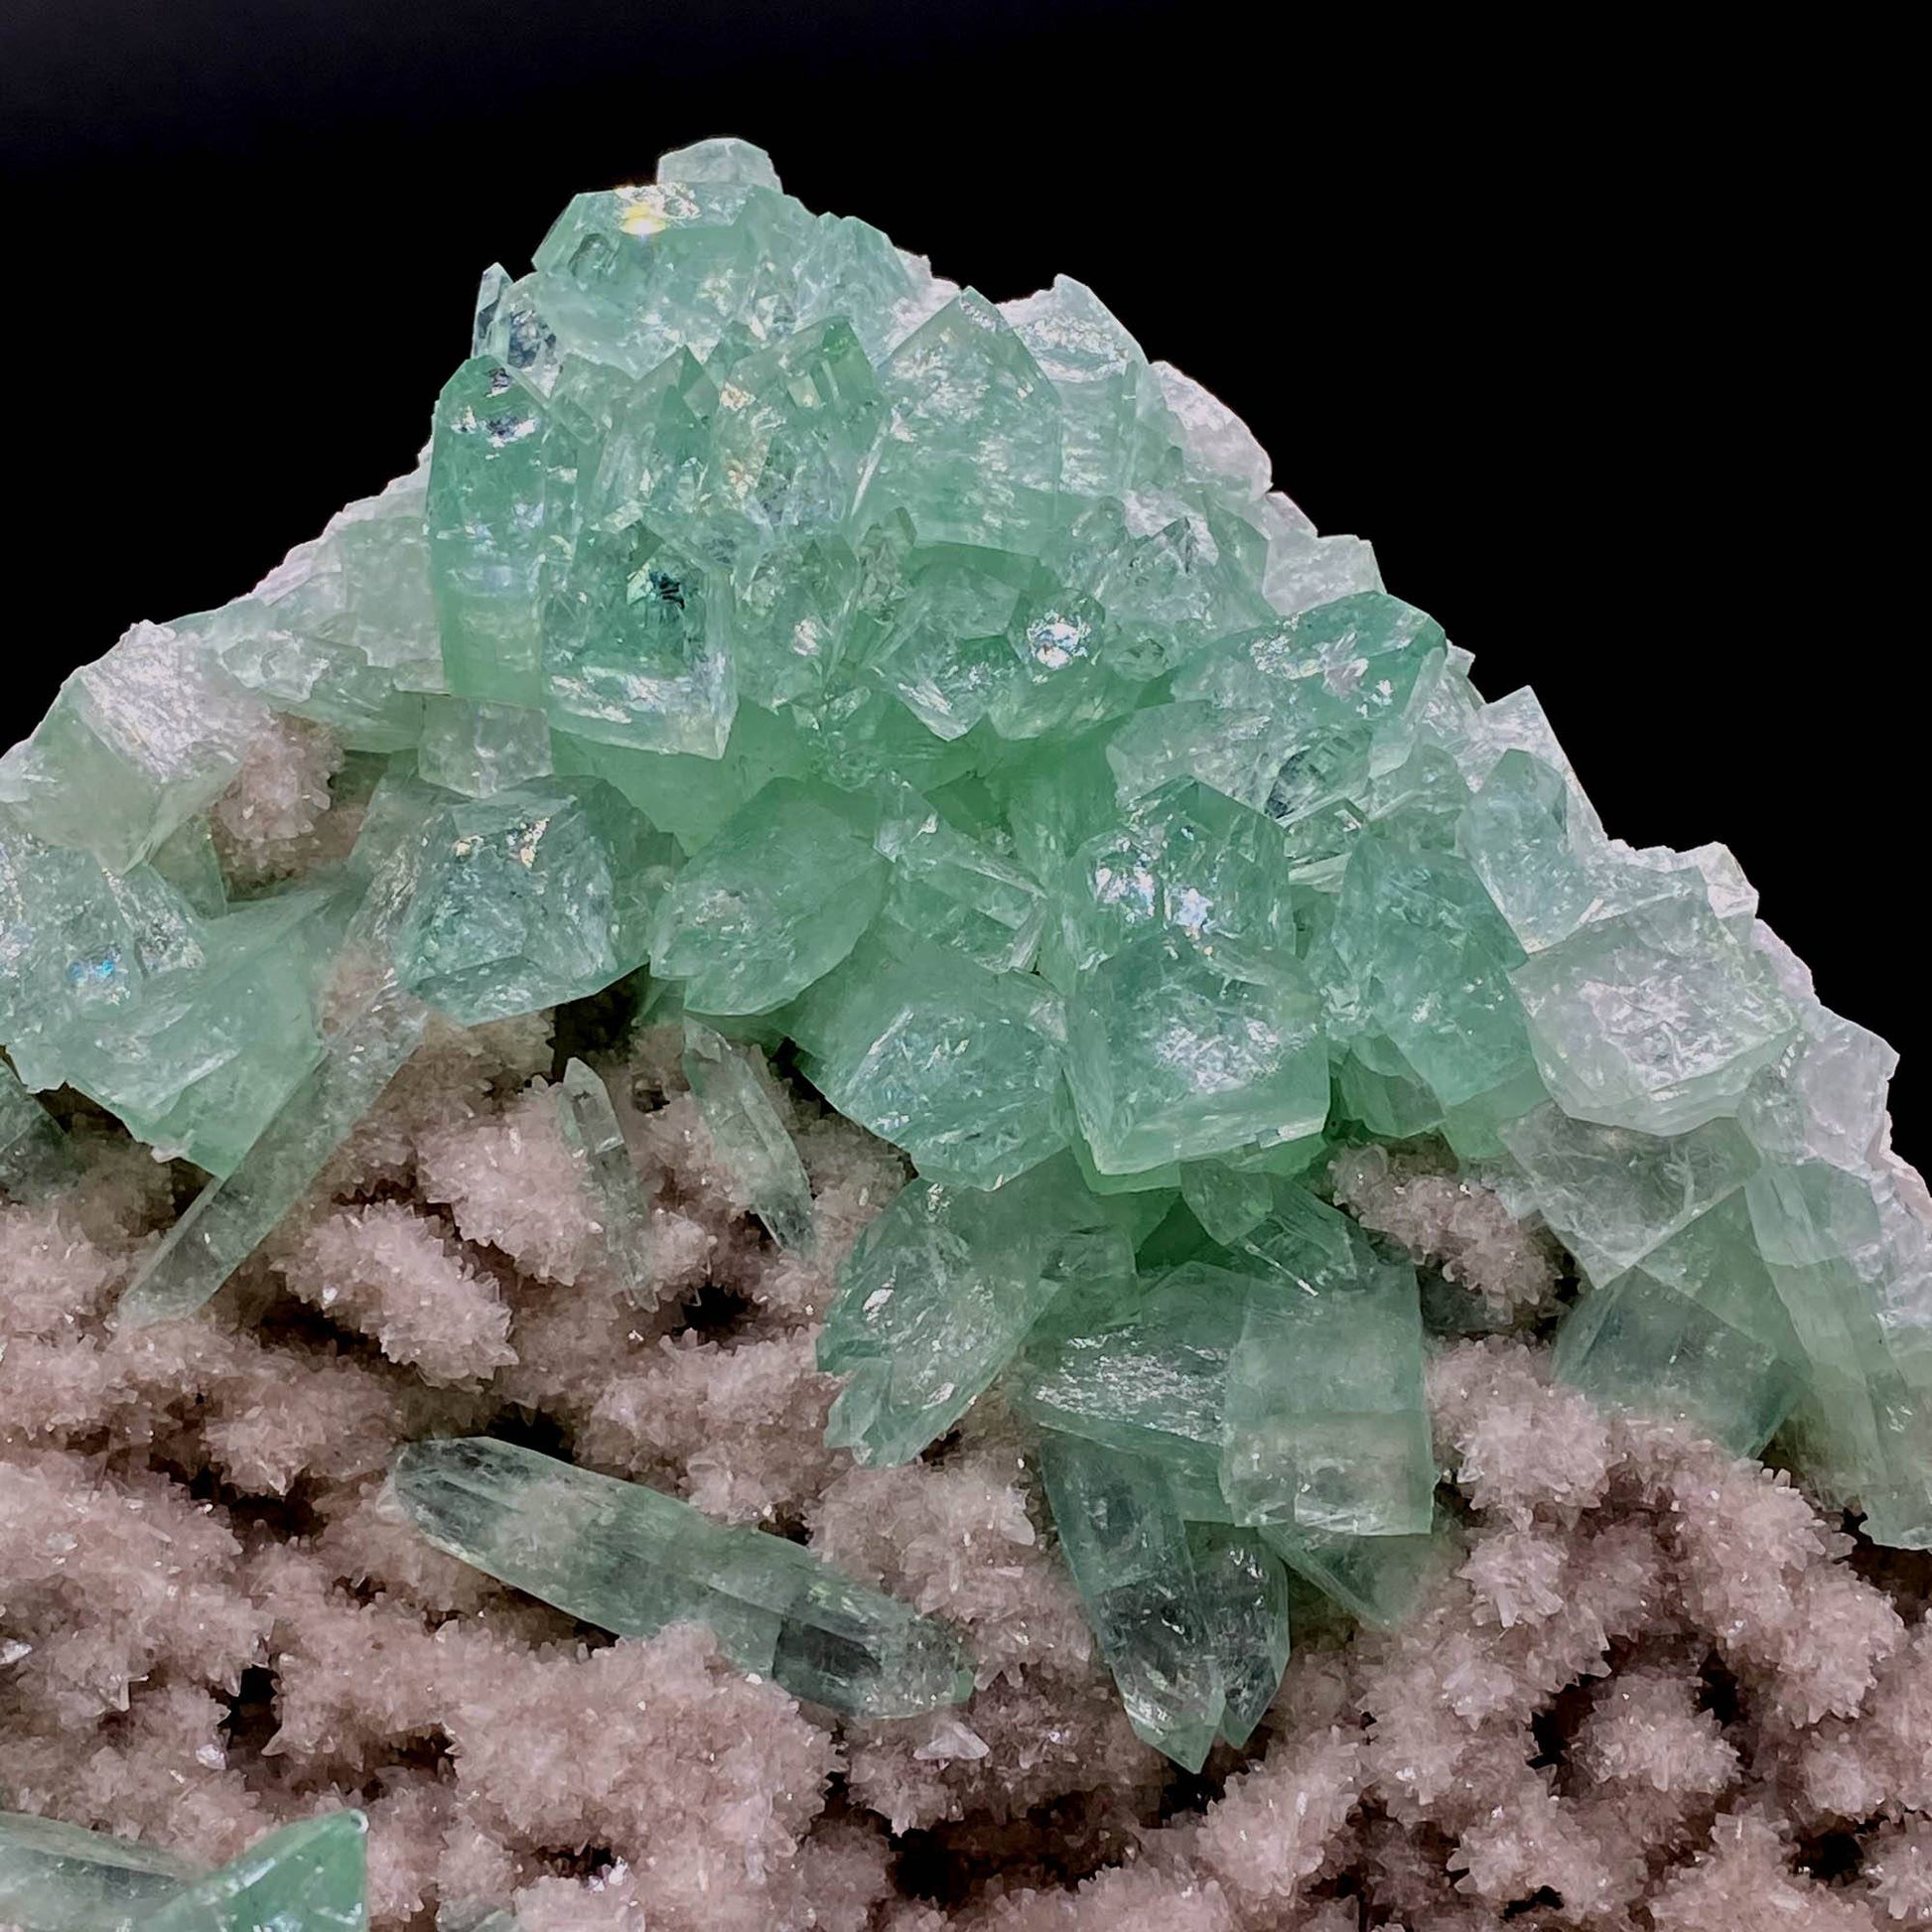 Green Apophyllite Sparkling Crystals on Heulandite Cluster # Q2  https://www.superbminerals.us/products/green-apophyllite-sparkling-crystals-on-heulandite-cluster-q2  Features:Sparkling cluster of green Apophyllite crystals in a radiating formation on matrix lined with creme-colored stilbite crystals in aggregates. The apophyllite crystals are fully terminated with vivd green color and glassy luster.&nbsp;Primary Mineral(s): ApophylliteSecondary Mineral(s): N/A Matrix: Heulandite